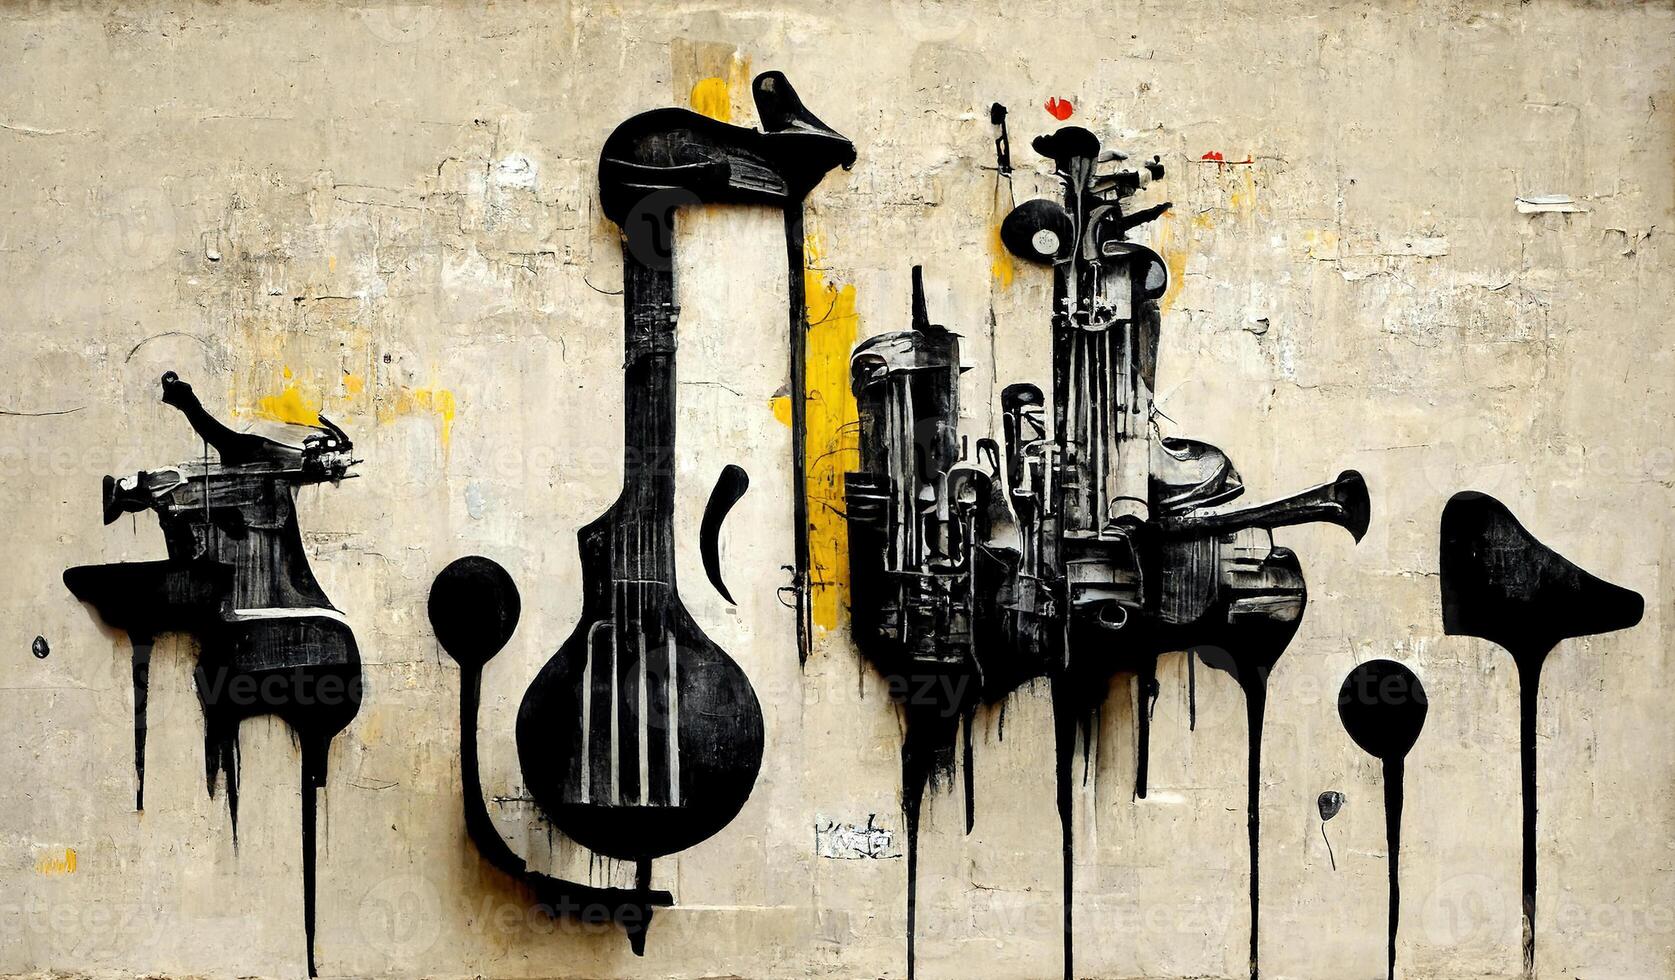 , Abstract Street art with keys and musical instruments silhouettes. Ink colorful graffiti art on a textured paper vintage background, inspired by Banksy photo